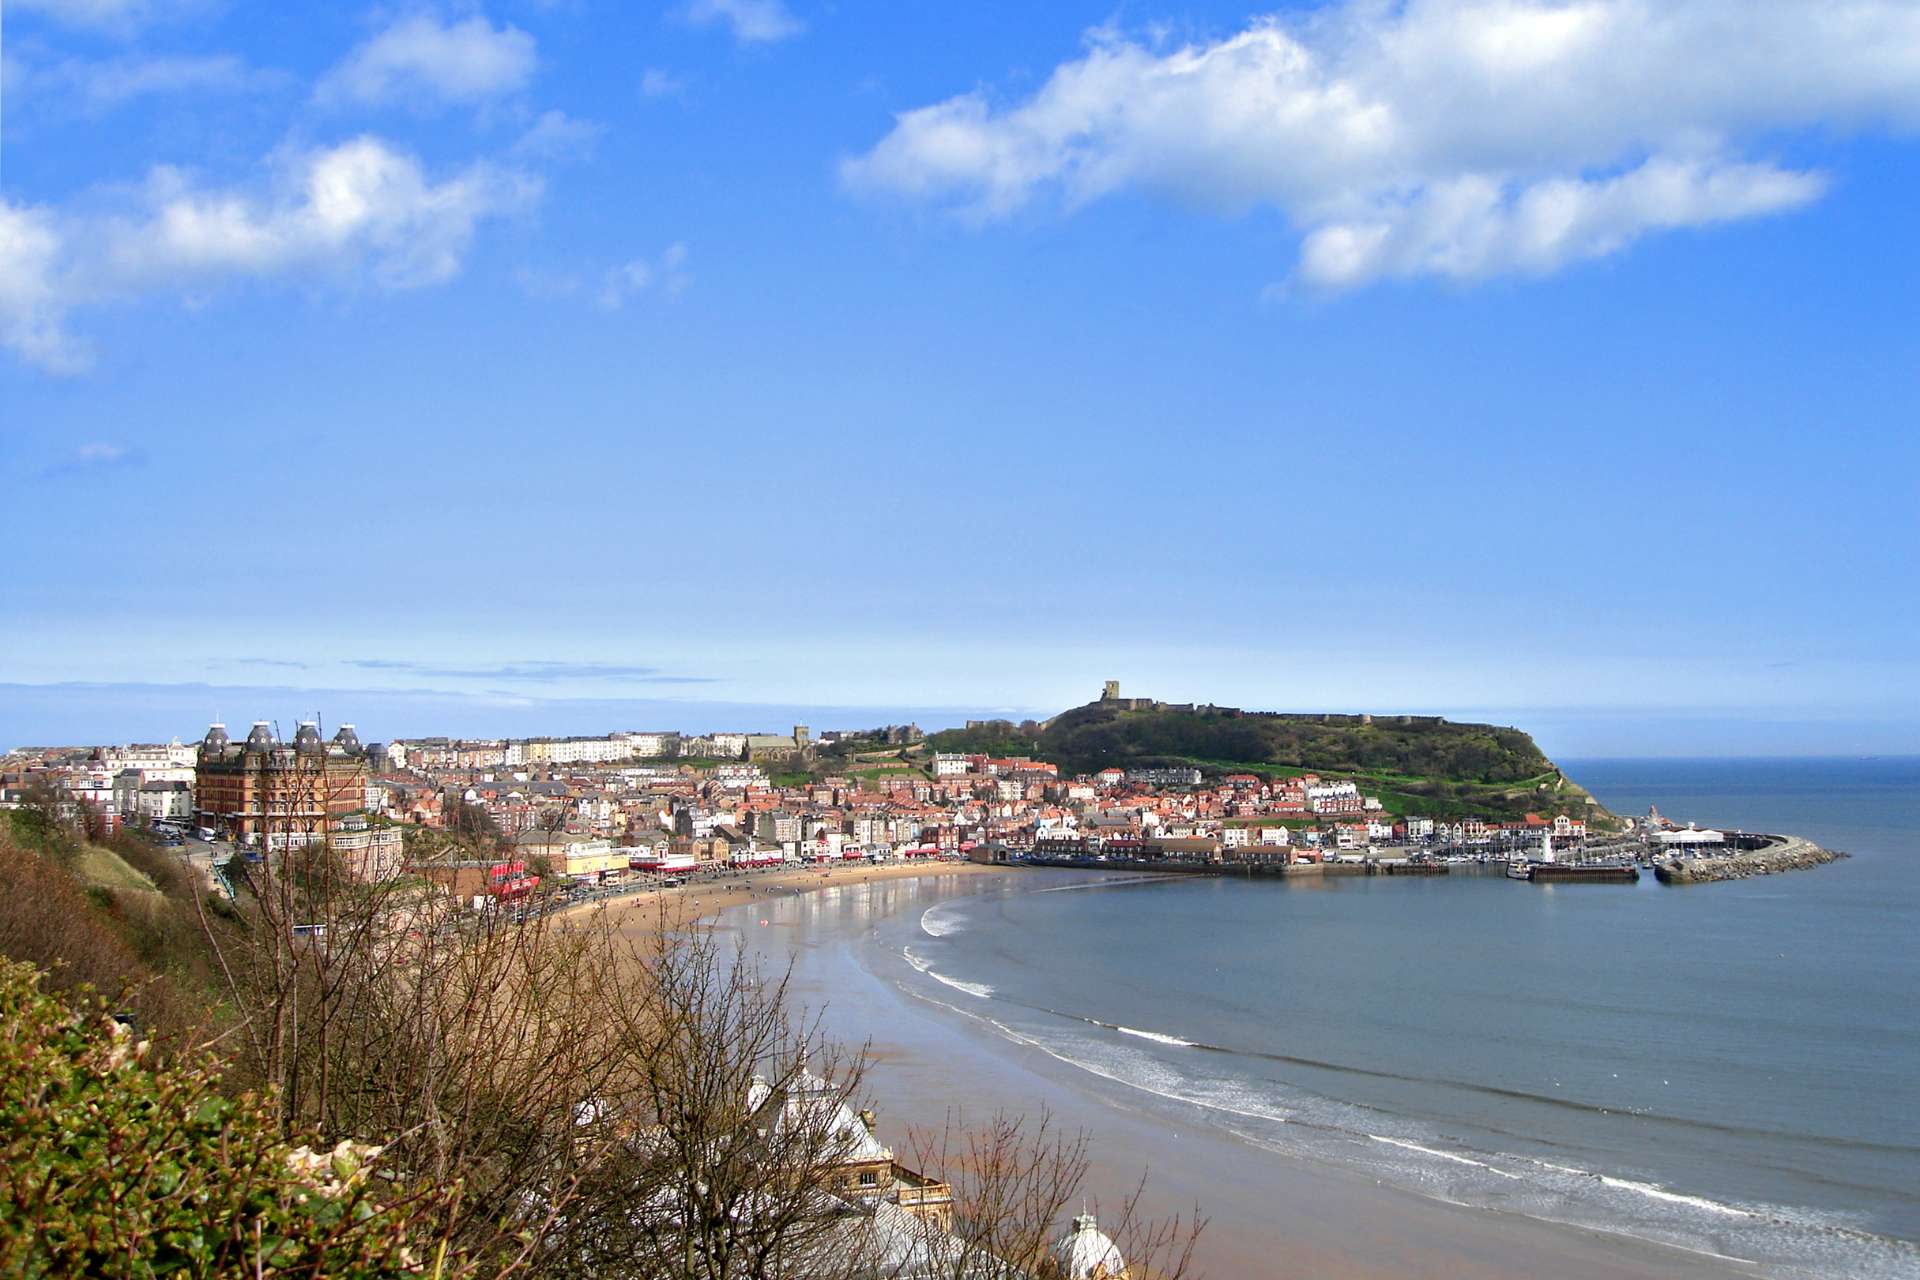 View of Scarborough South bay from the cliffs above.